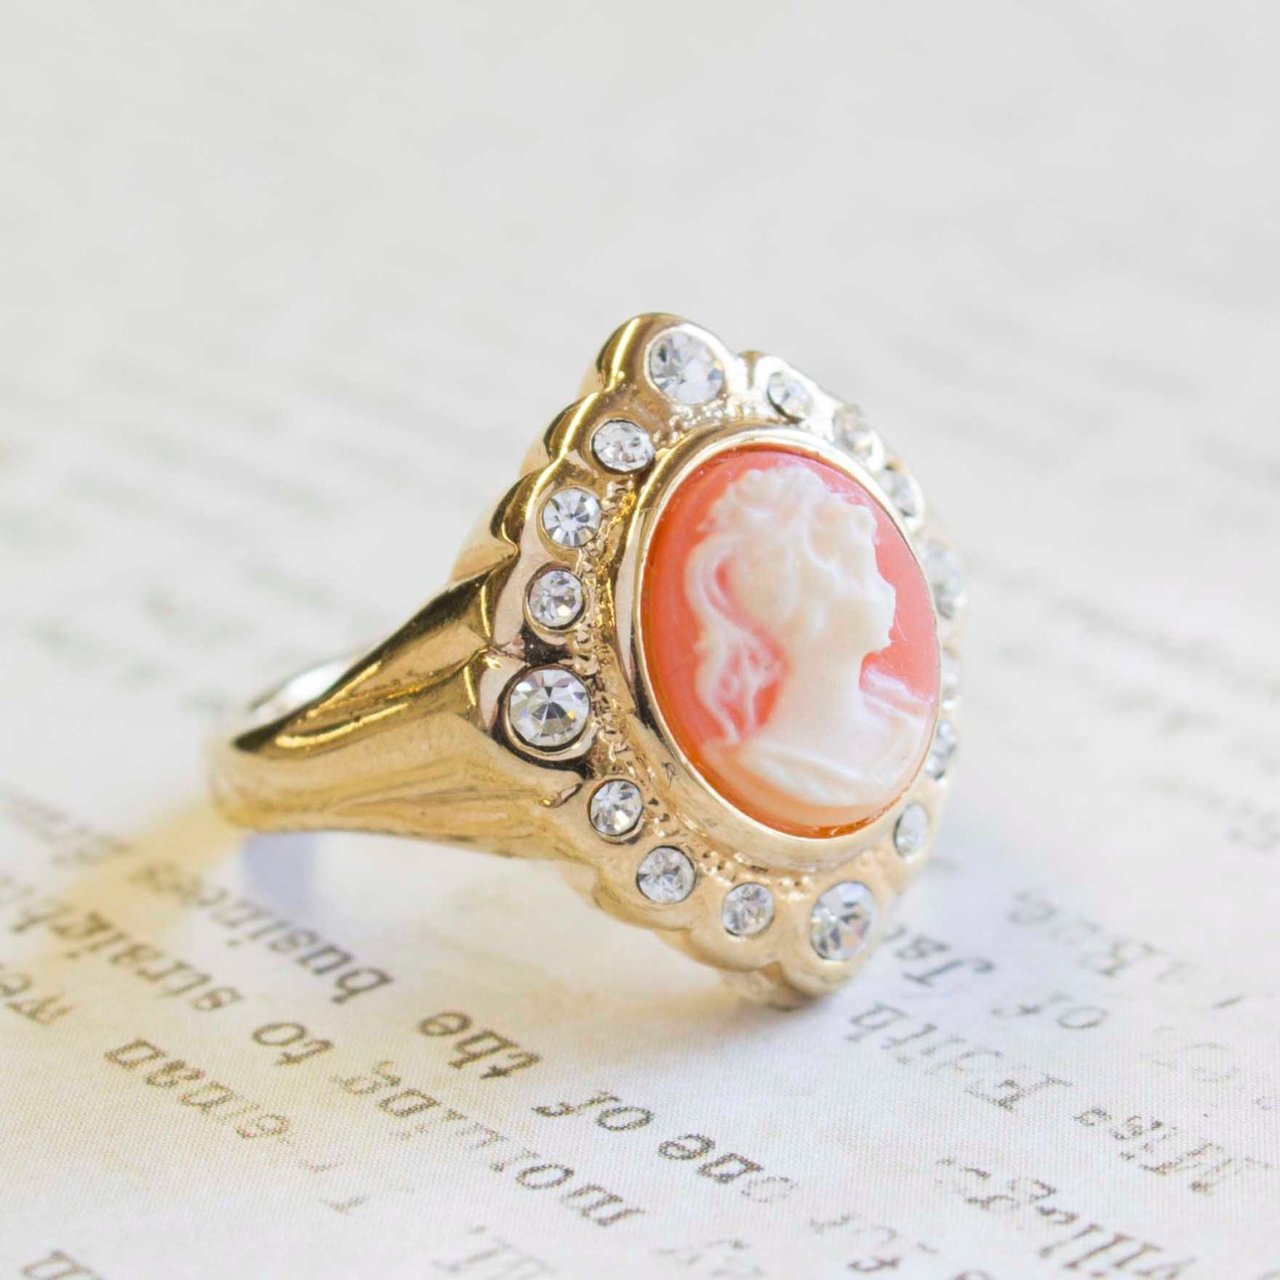 Antique Vintage Ring 1970s 18k Gold Plated White on Coral Cameo Ring Clear Swarovski Crystals Womans Costume Handmade Jewelry #R2146 Size: 6